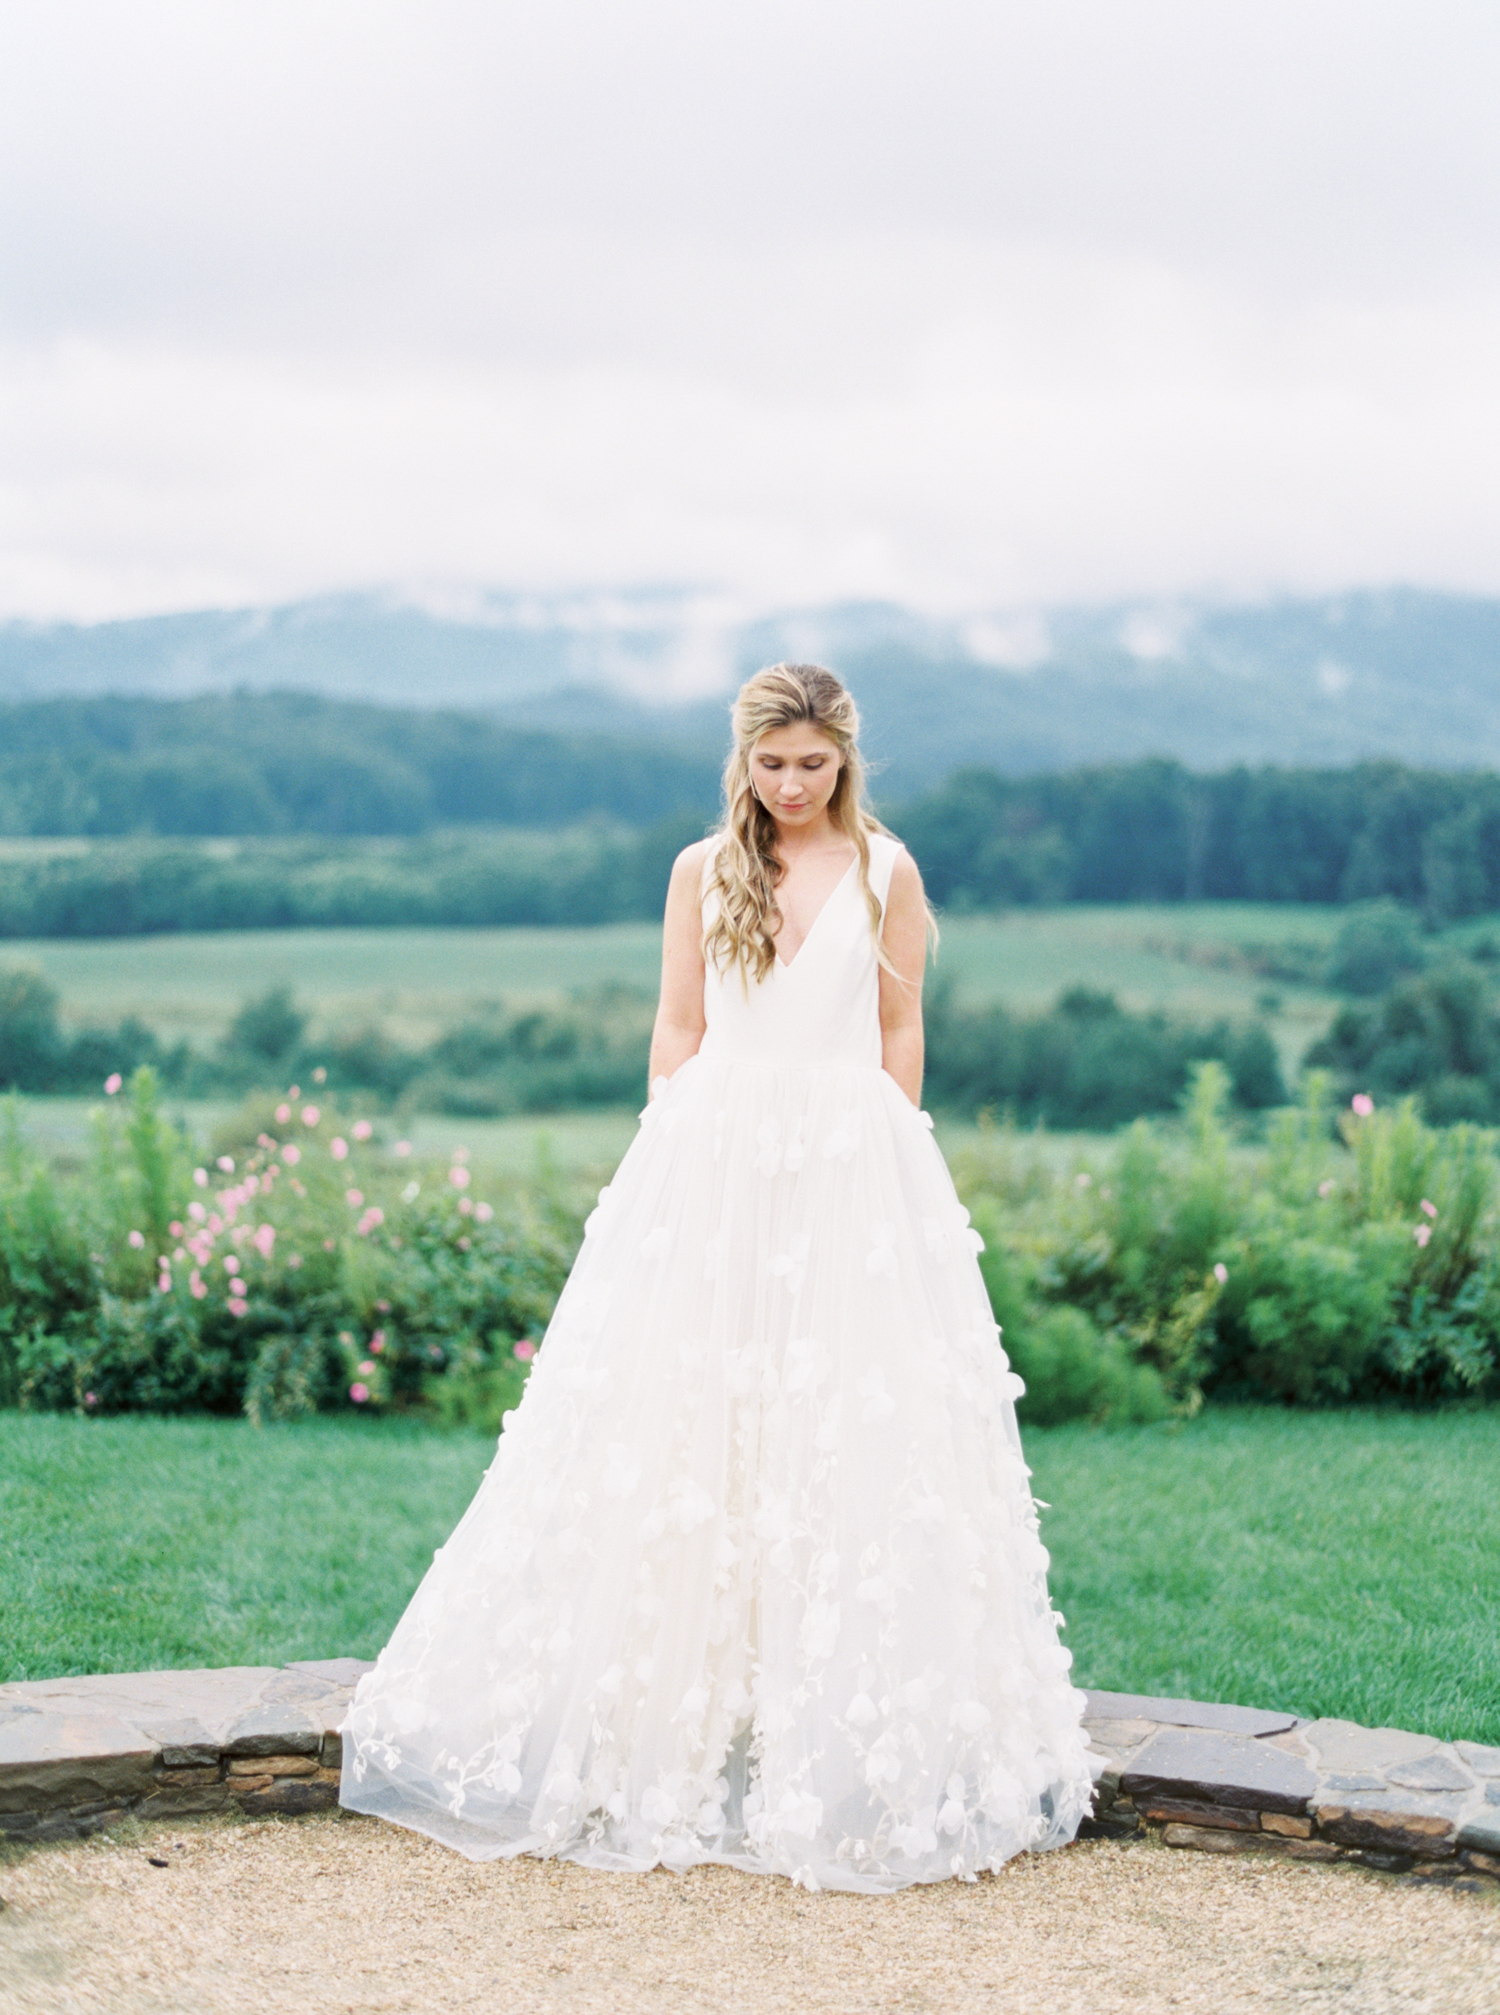 Pippin Hill Wedding Photos | Molly Carr Photography | Lauren Emerson Events | Pippin Hill Farm & Vineyard | Rime Arodaky Bride | Bride with Hair Down | Long Sleeve Lace Wedding Dress | Smiling Bride